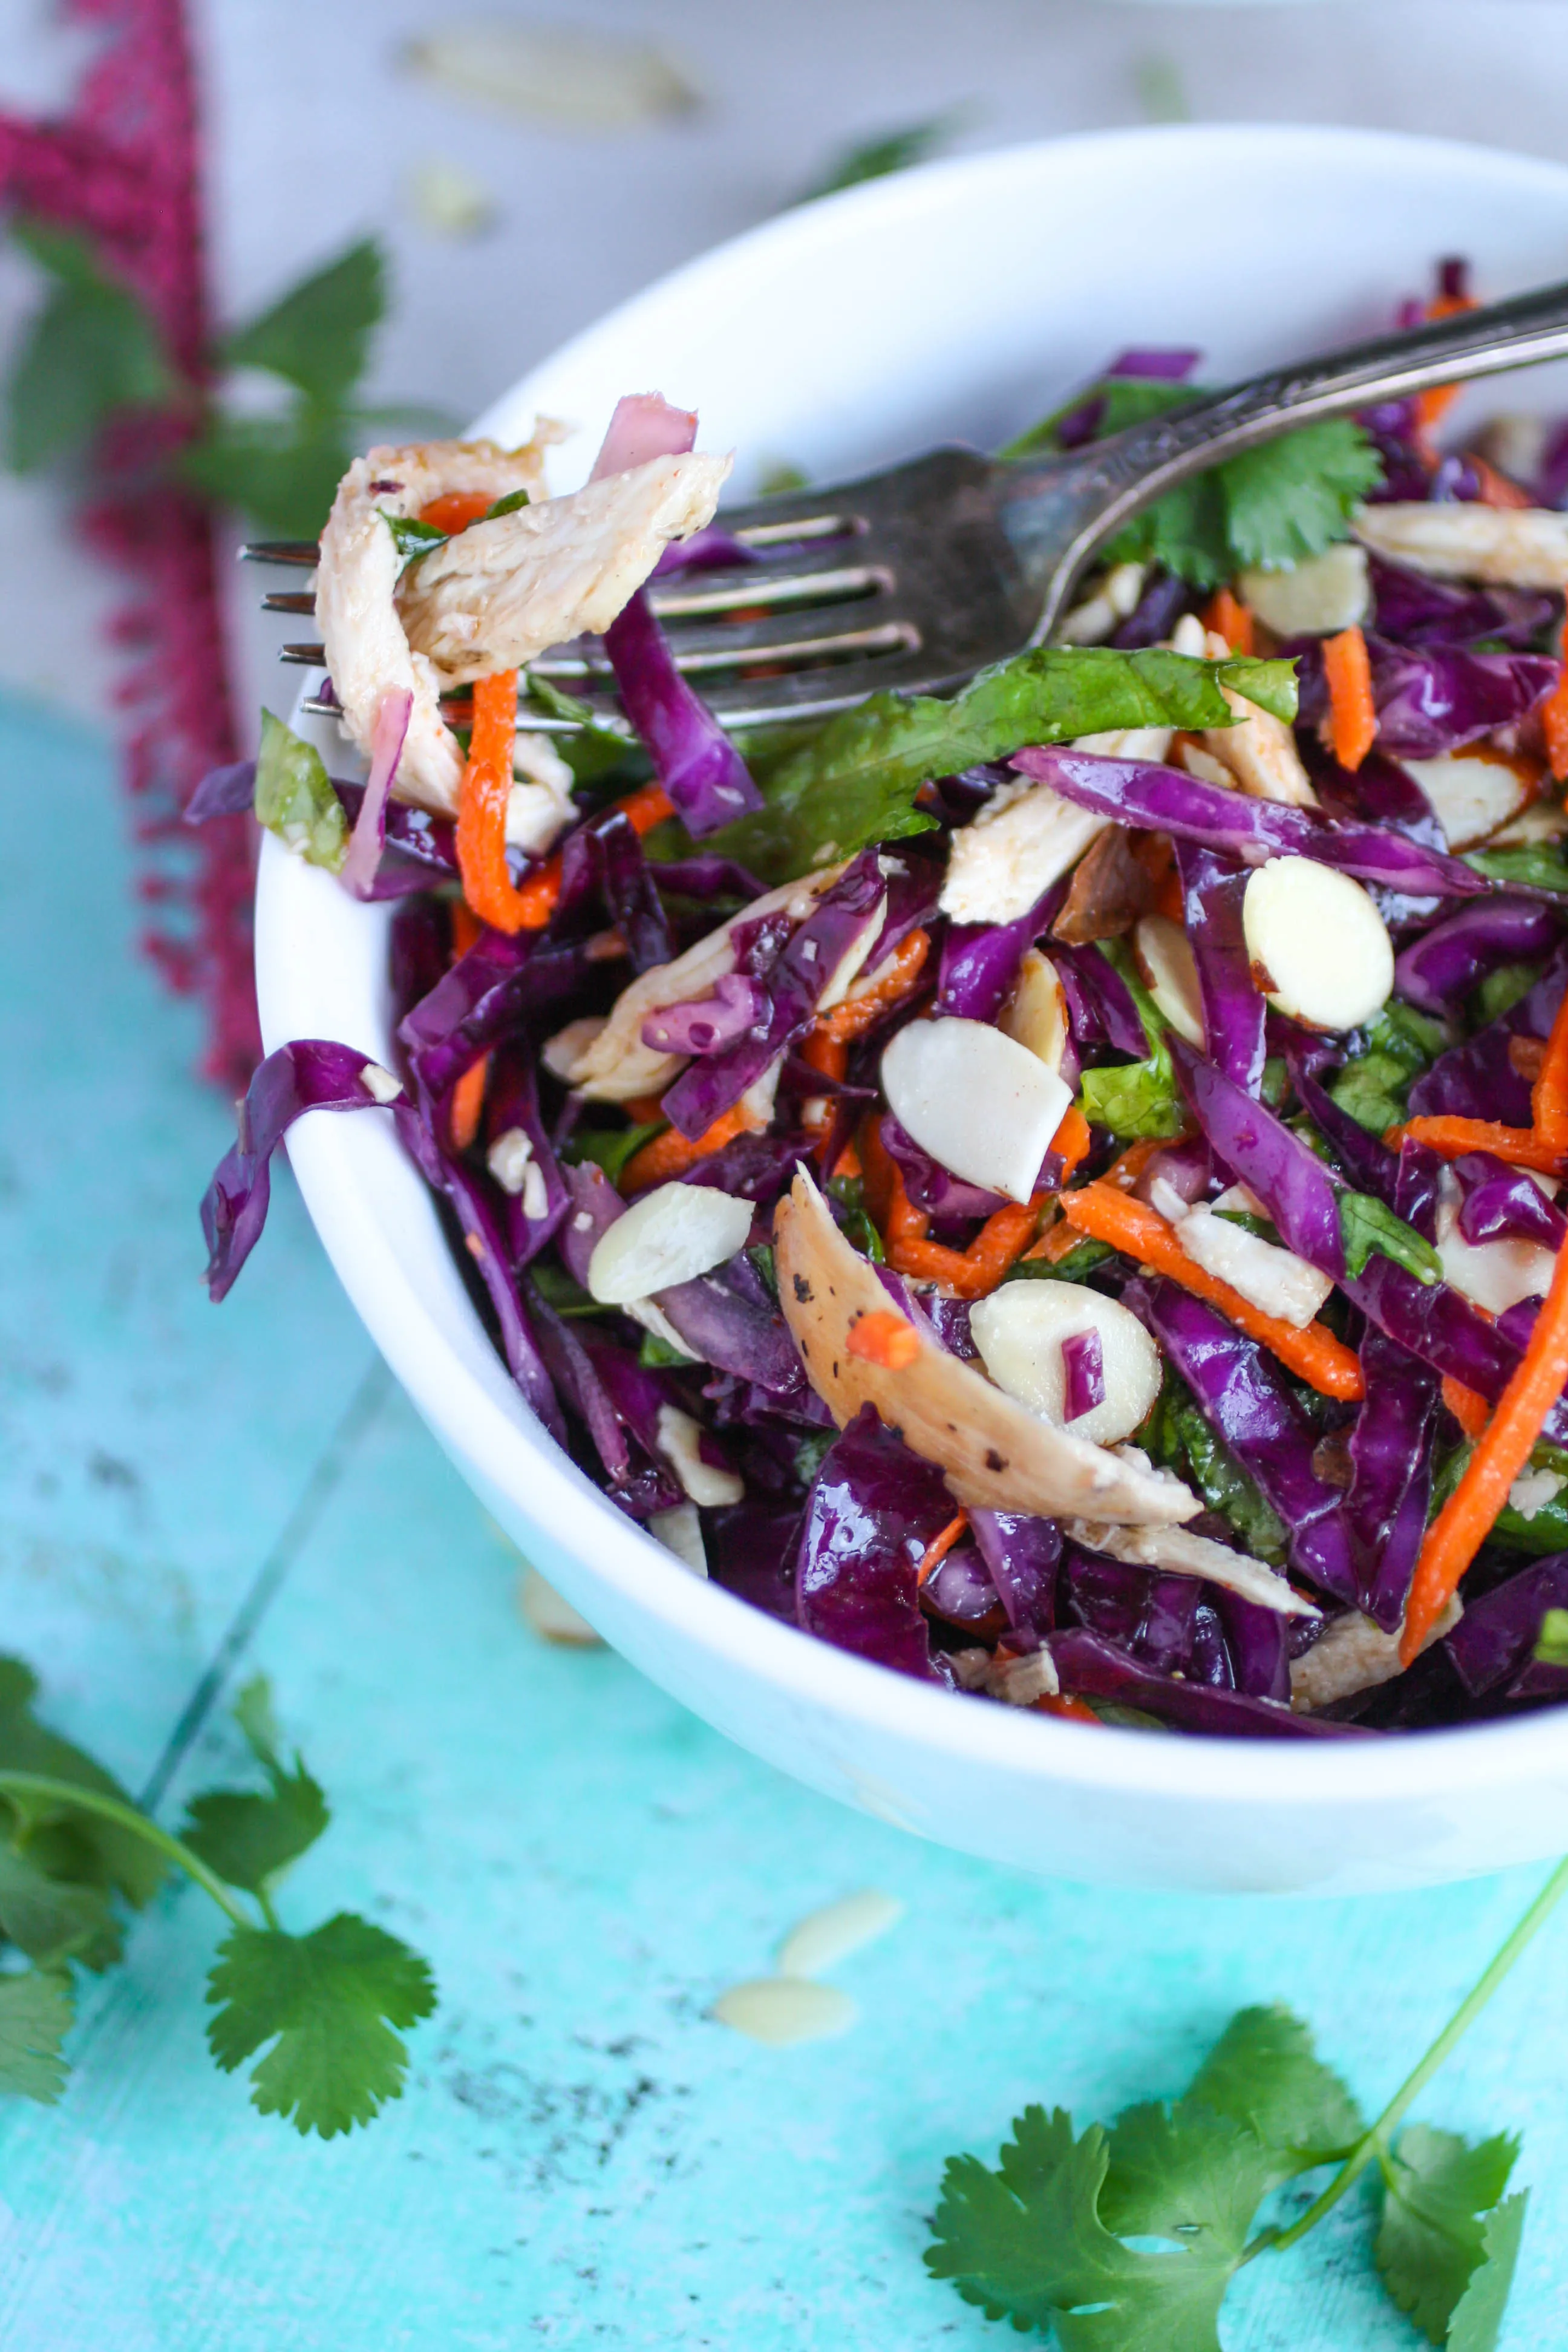 Crunchy Cabbage & Chicken Salad with Sesame Dressing is a nice dish to serve for lunch or dinner. You'll love the color and flavor in this crunchy cabbage salad!